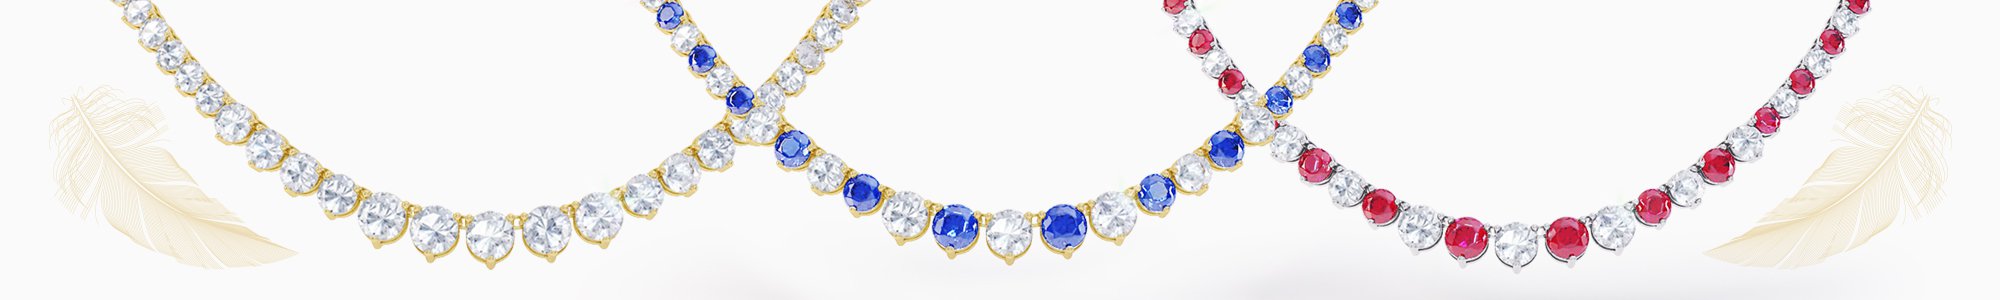 Stardust Collection - All Sapphire Jewelry